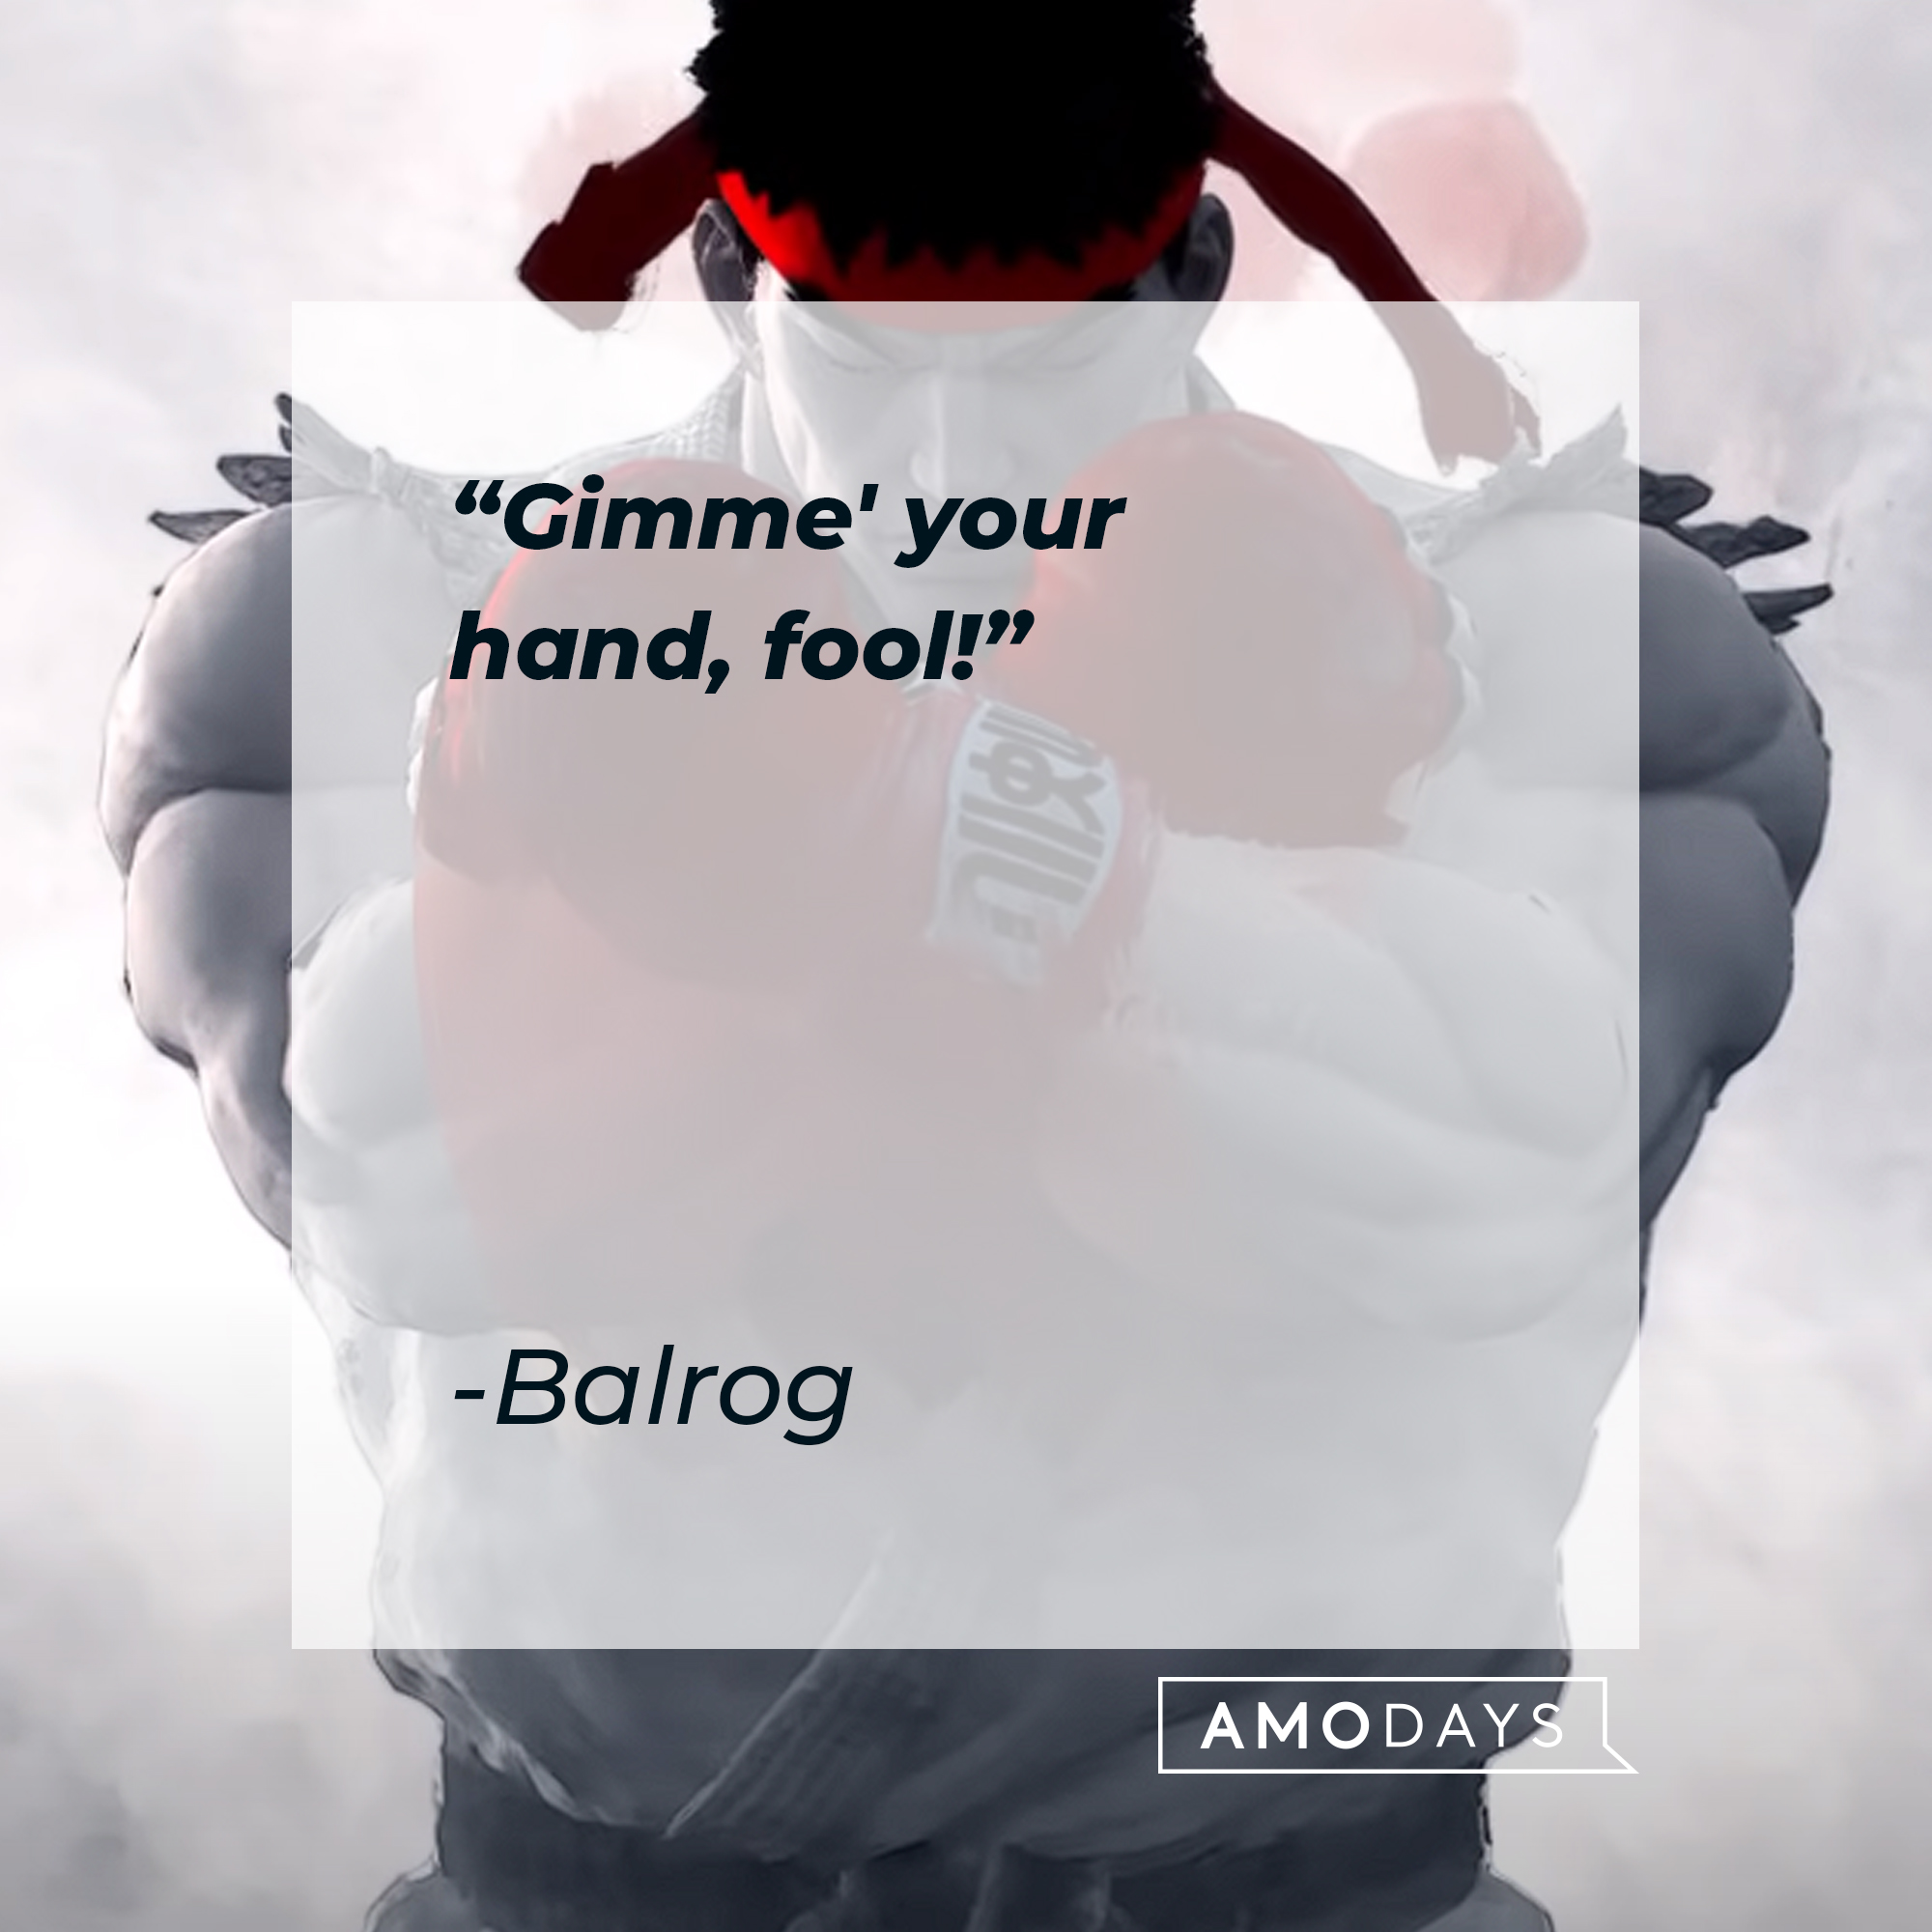 Balrog's quote: "Gimme' your hand, fool!" | Source: youtube.com/PlayStation